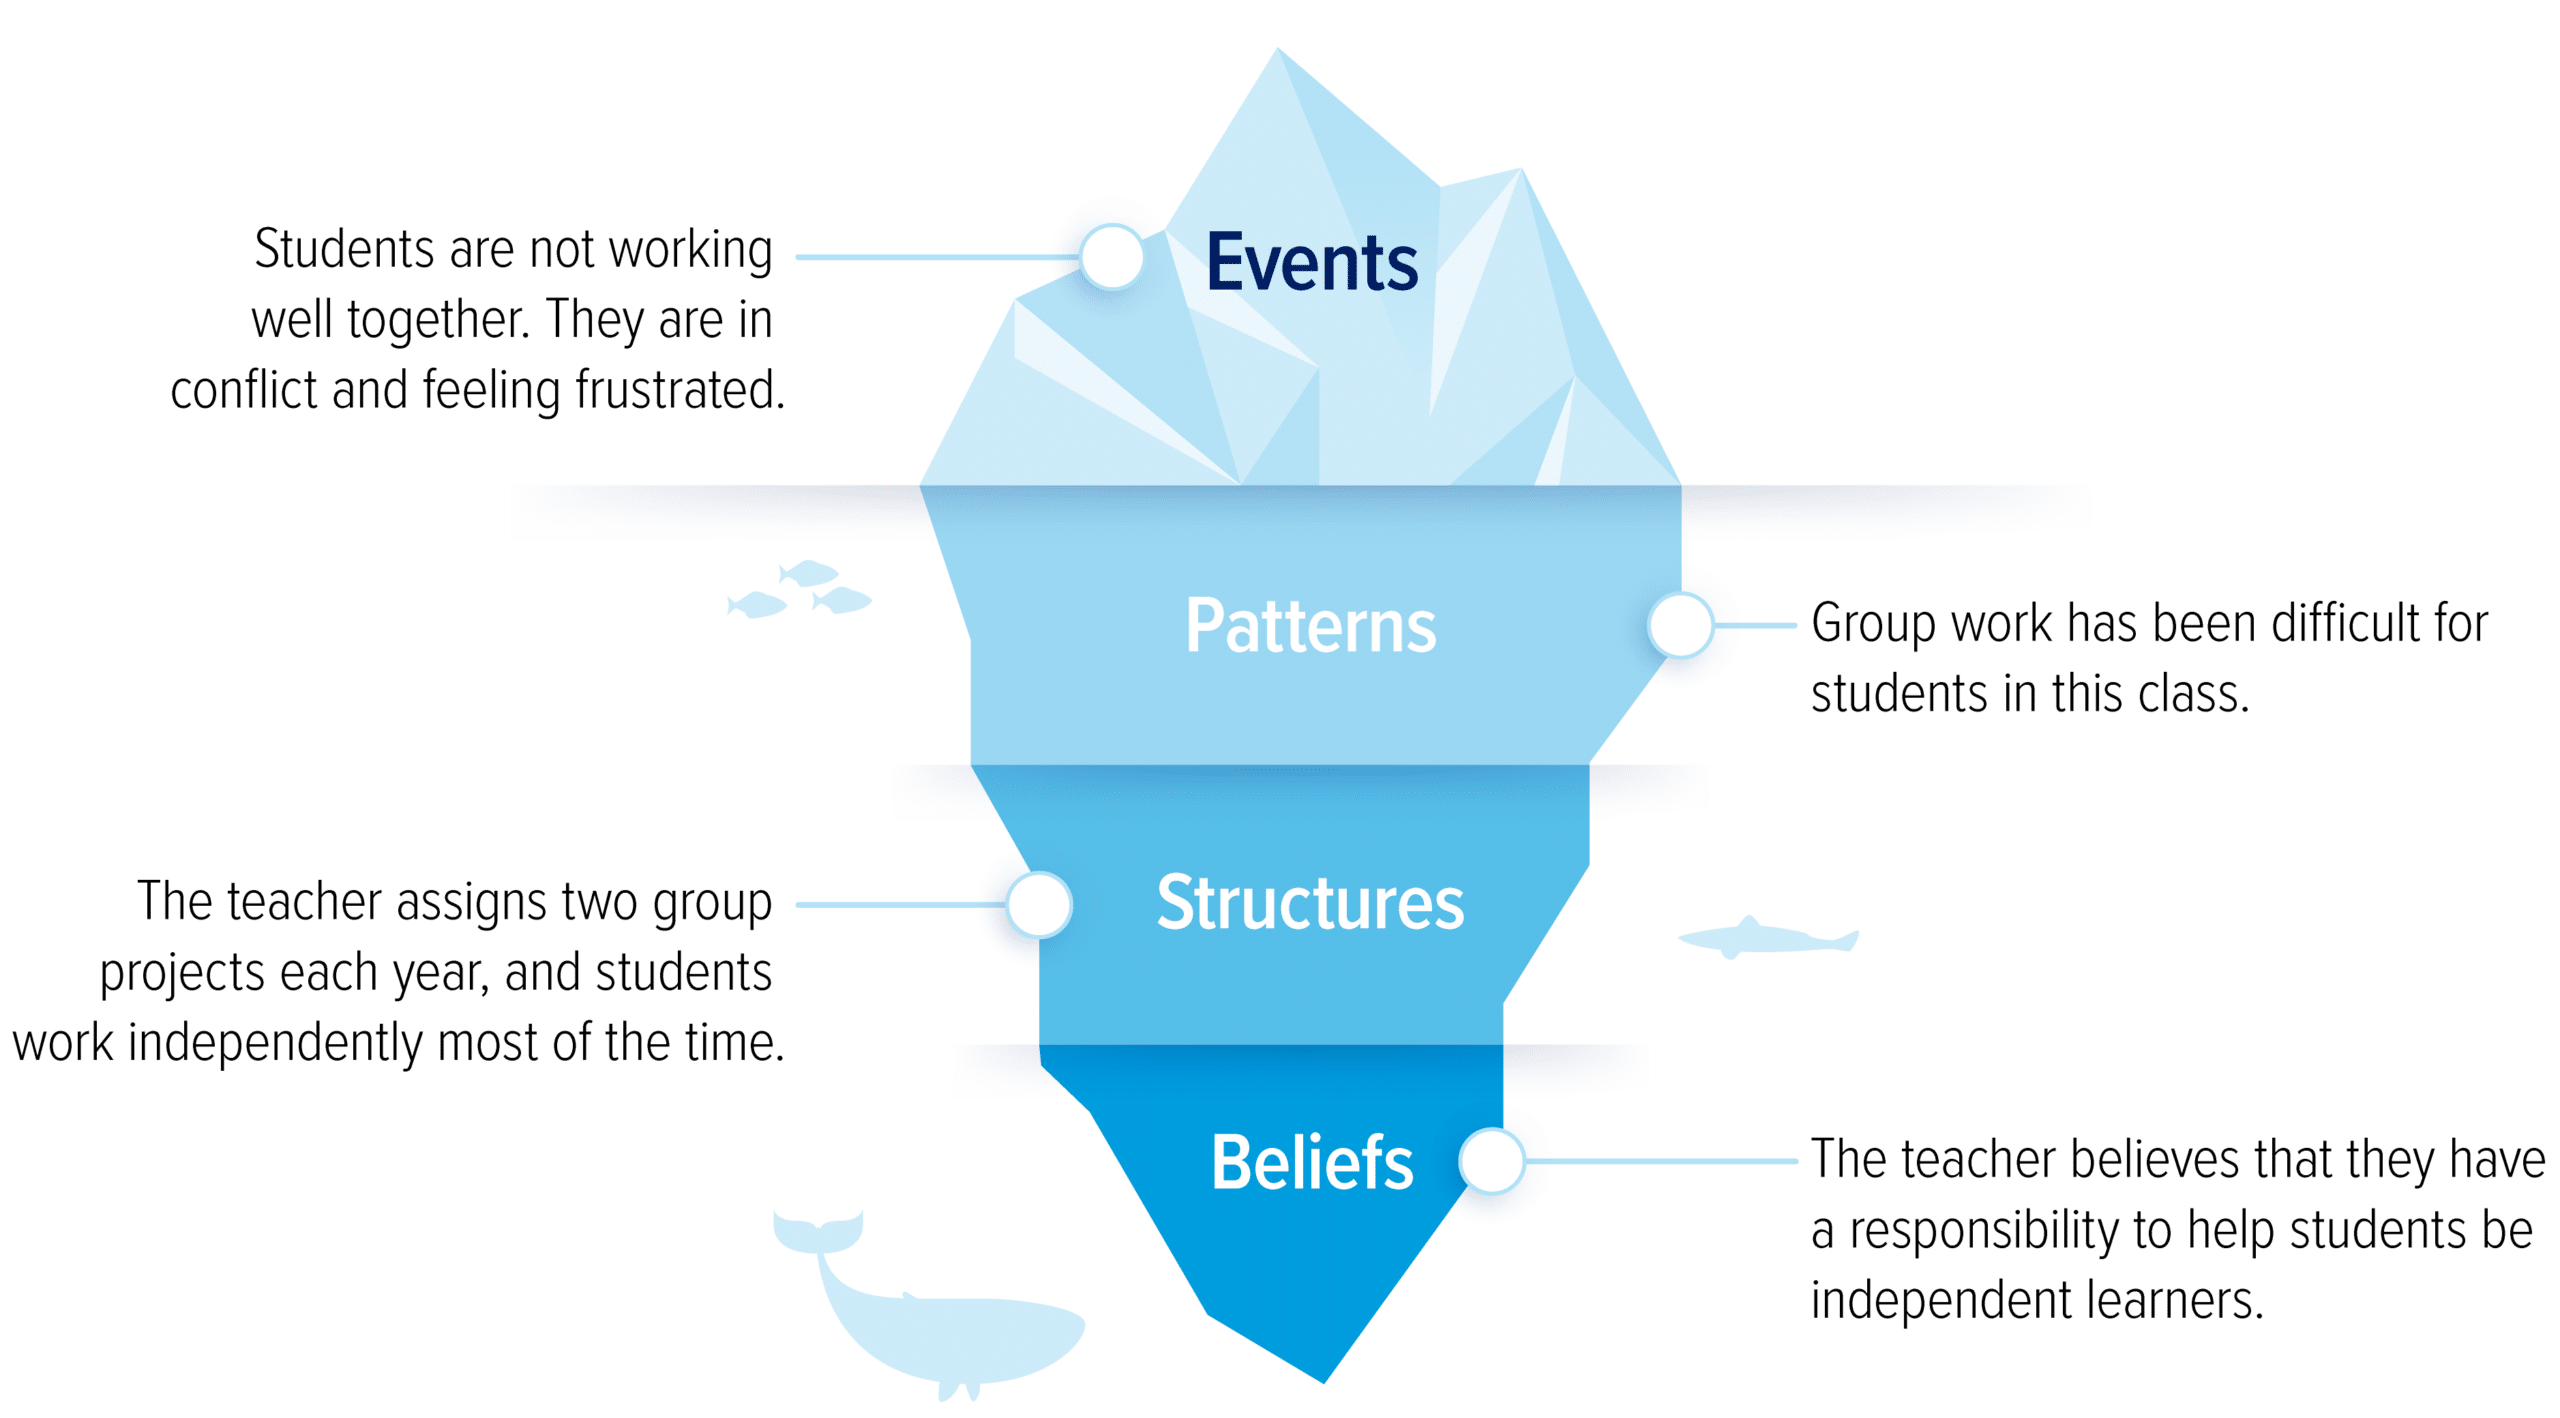 Iceberg graphic with additional descriptions of Events, Patterns, Structures, and Beliefs